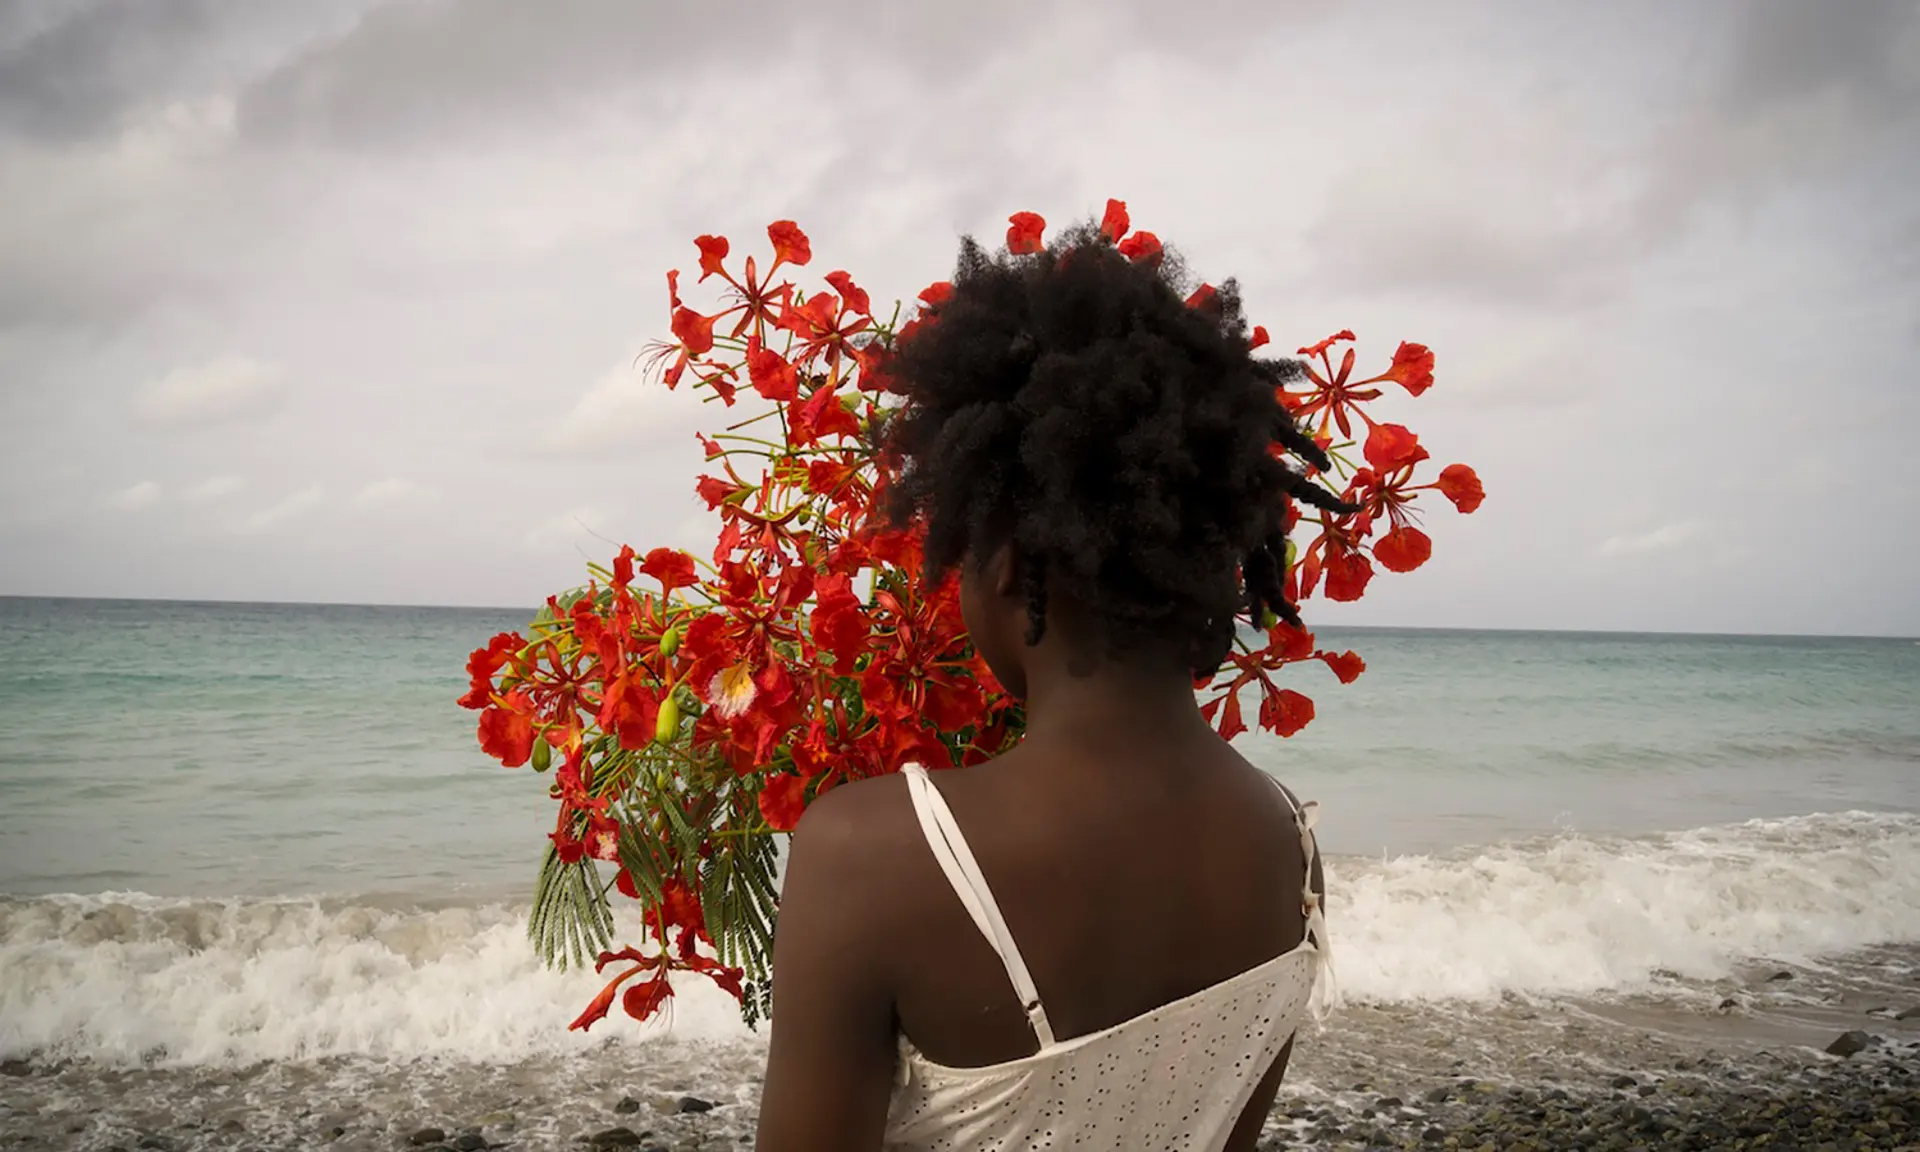 A dark-skinned girl stands with her back to the camera, holding a lush bouquet of delicate red flowers up to her face. She faces a calm ocean, with a small wave breaking at the shore. The sky is overcast.